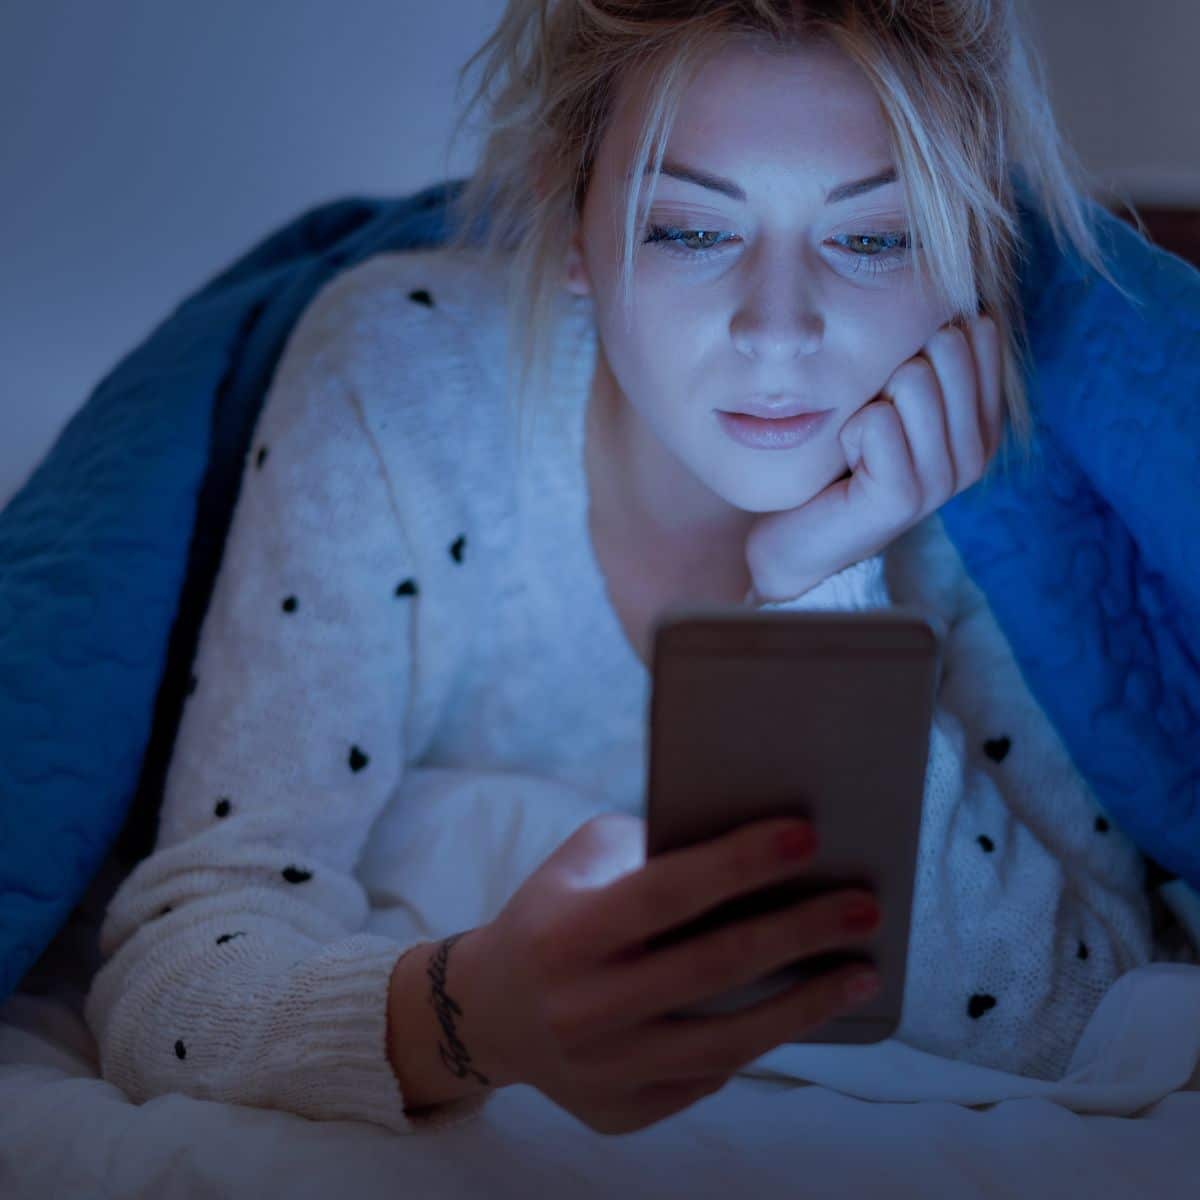 woman staying up late on her phone